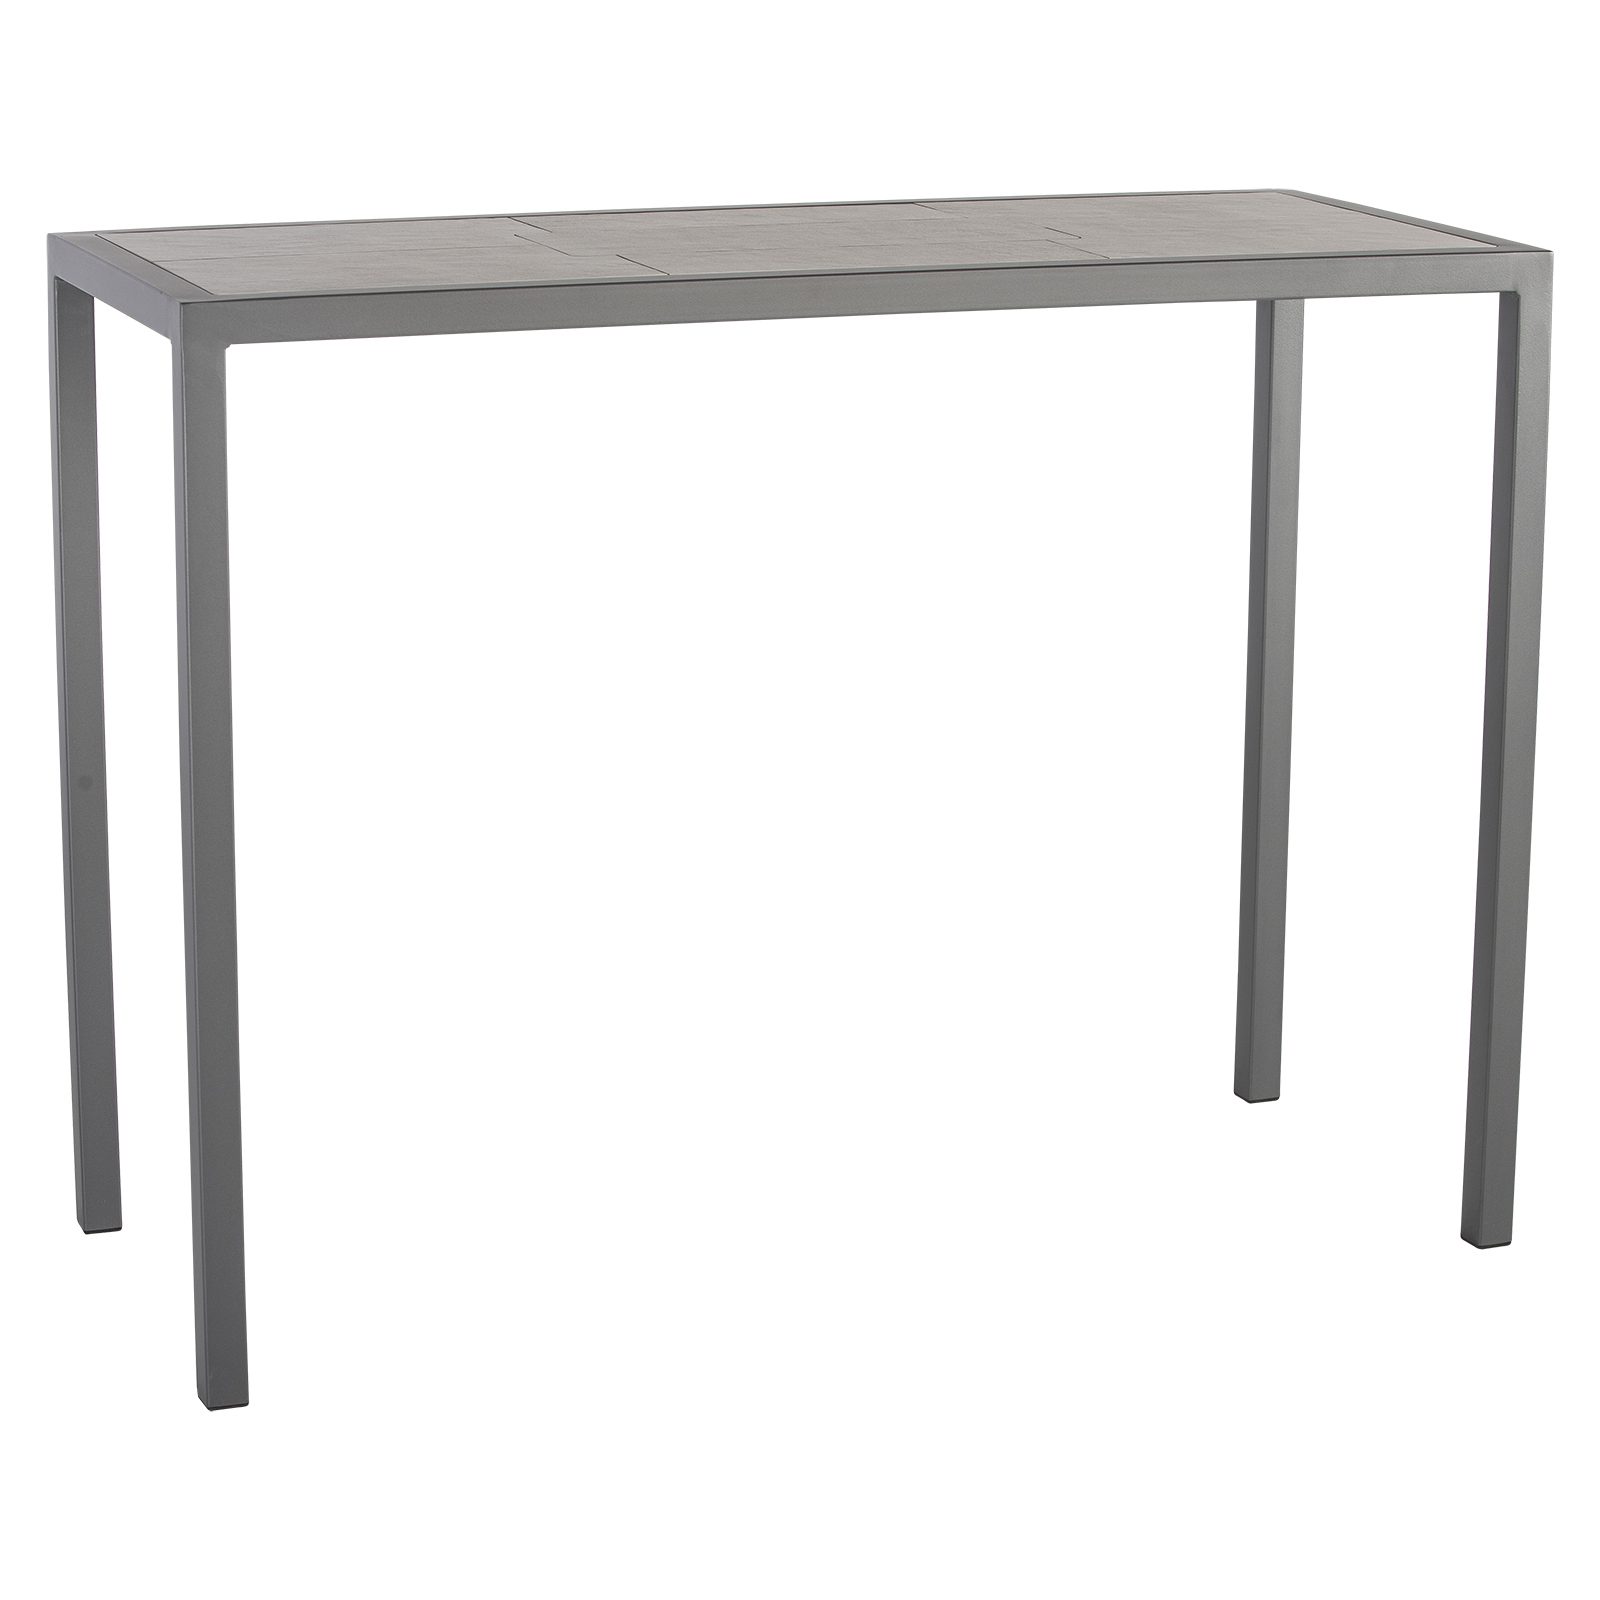 21" x 57" Counter Table - Fully Welded Tables - Quadra Iron Tables 104